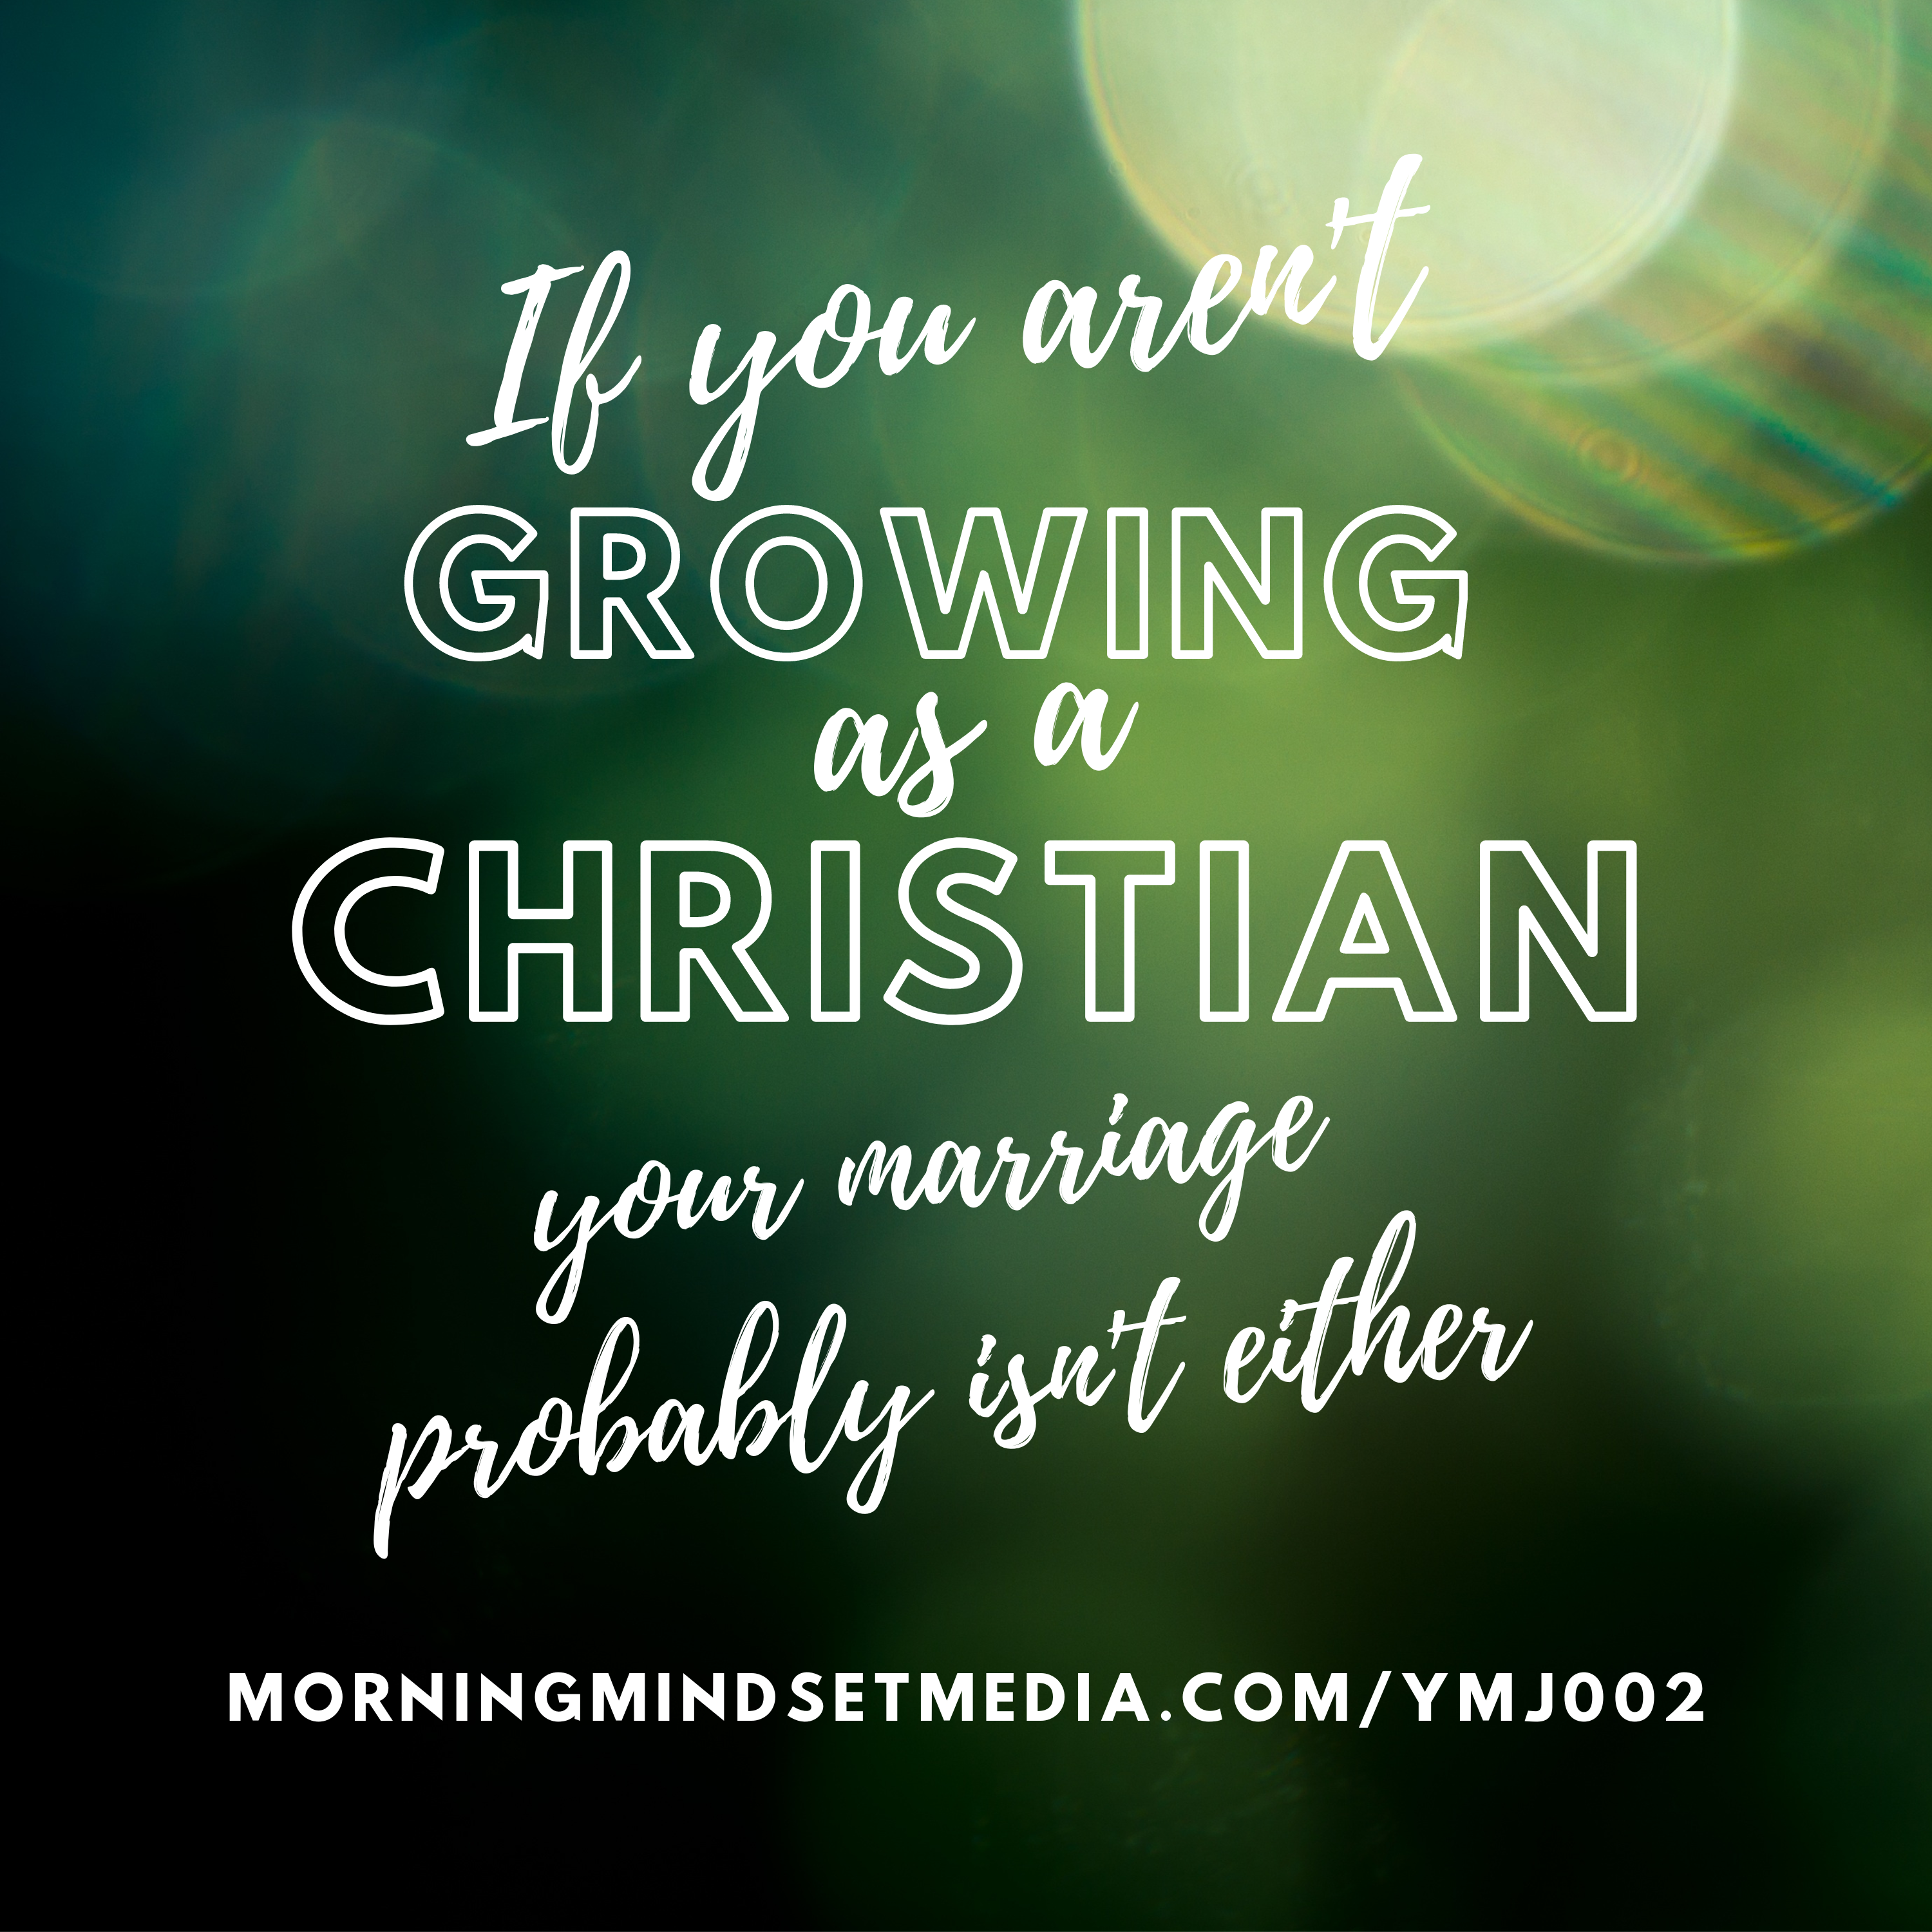 002: If you aren’t growing as a Christian, your marriage probably isn’t either